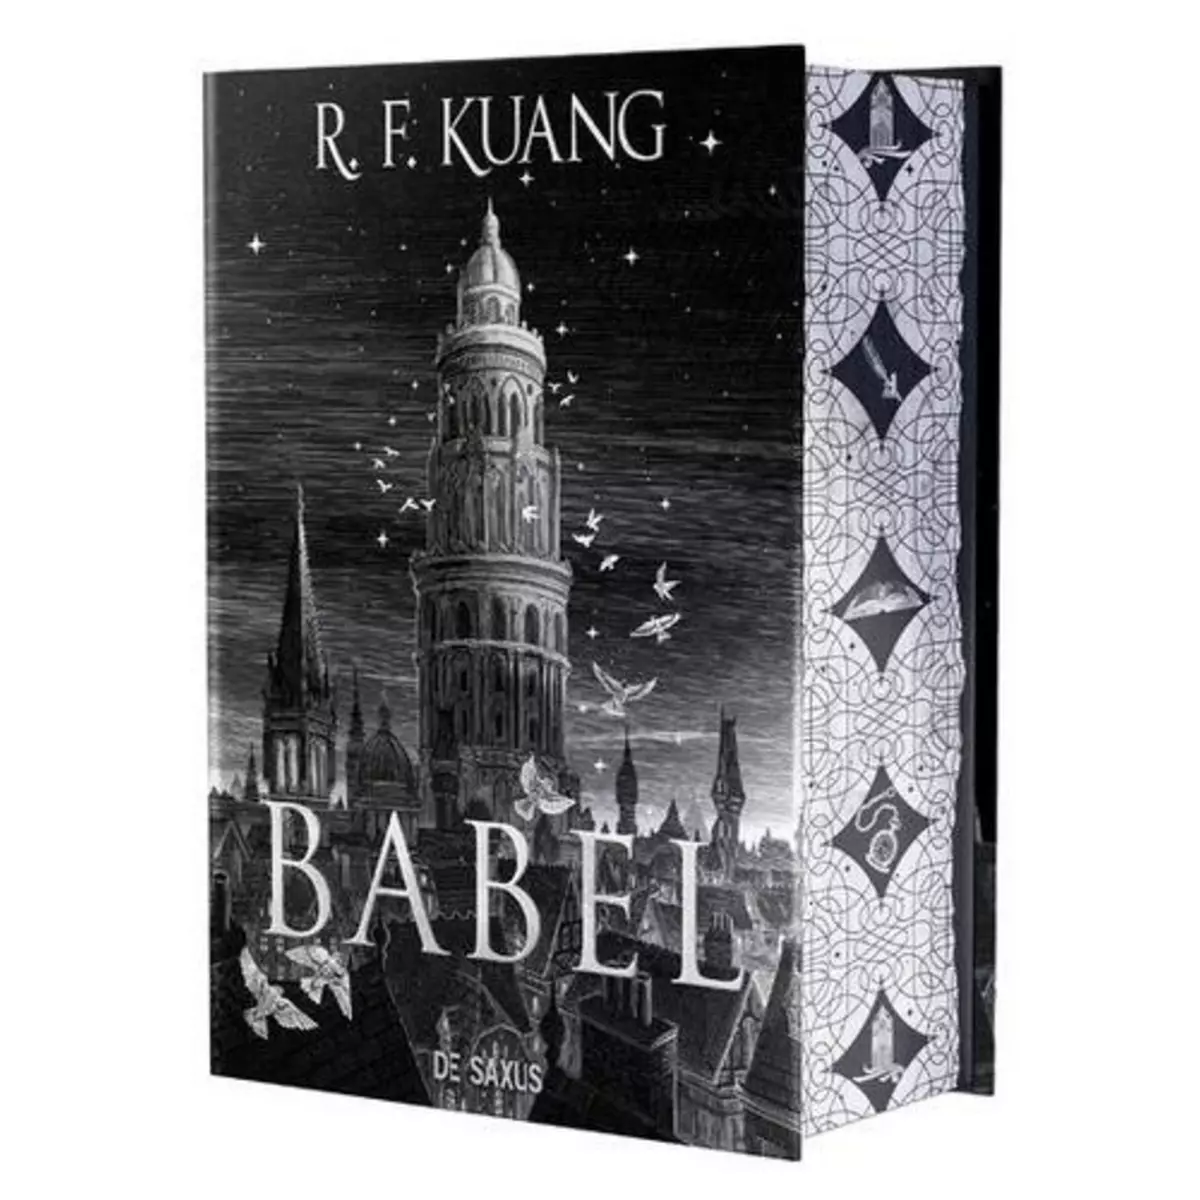  BABEL. EDITION COLLECTOR, Kuang Rebecca F.